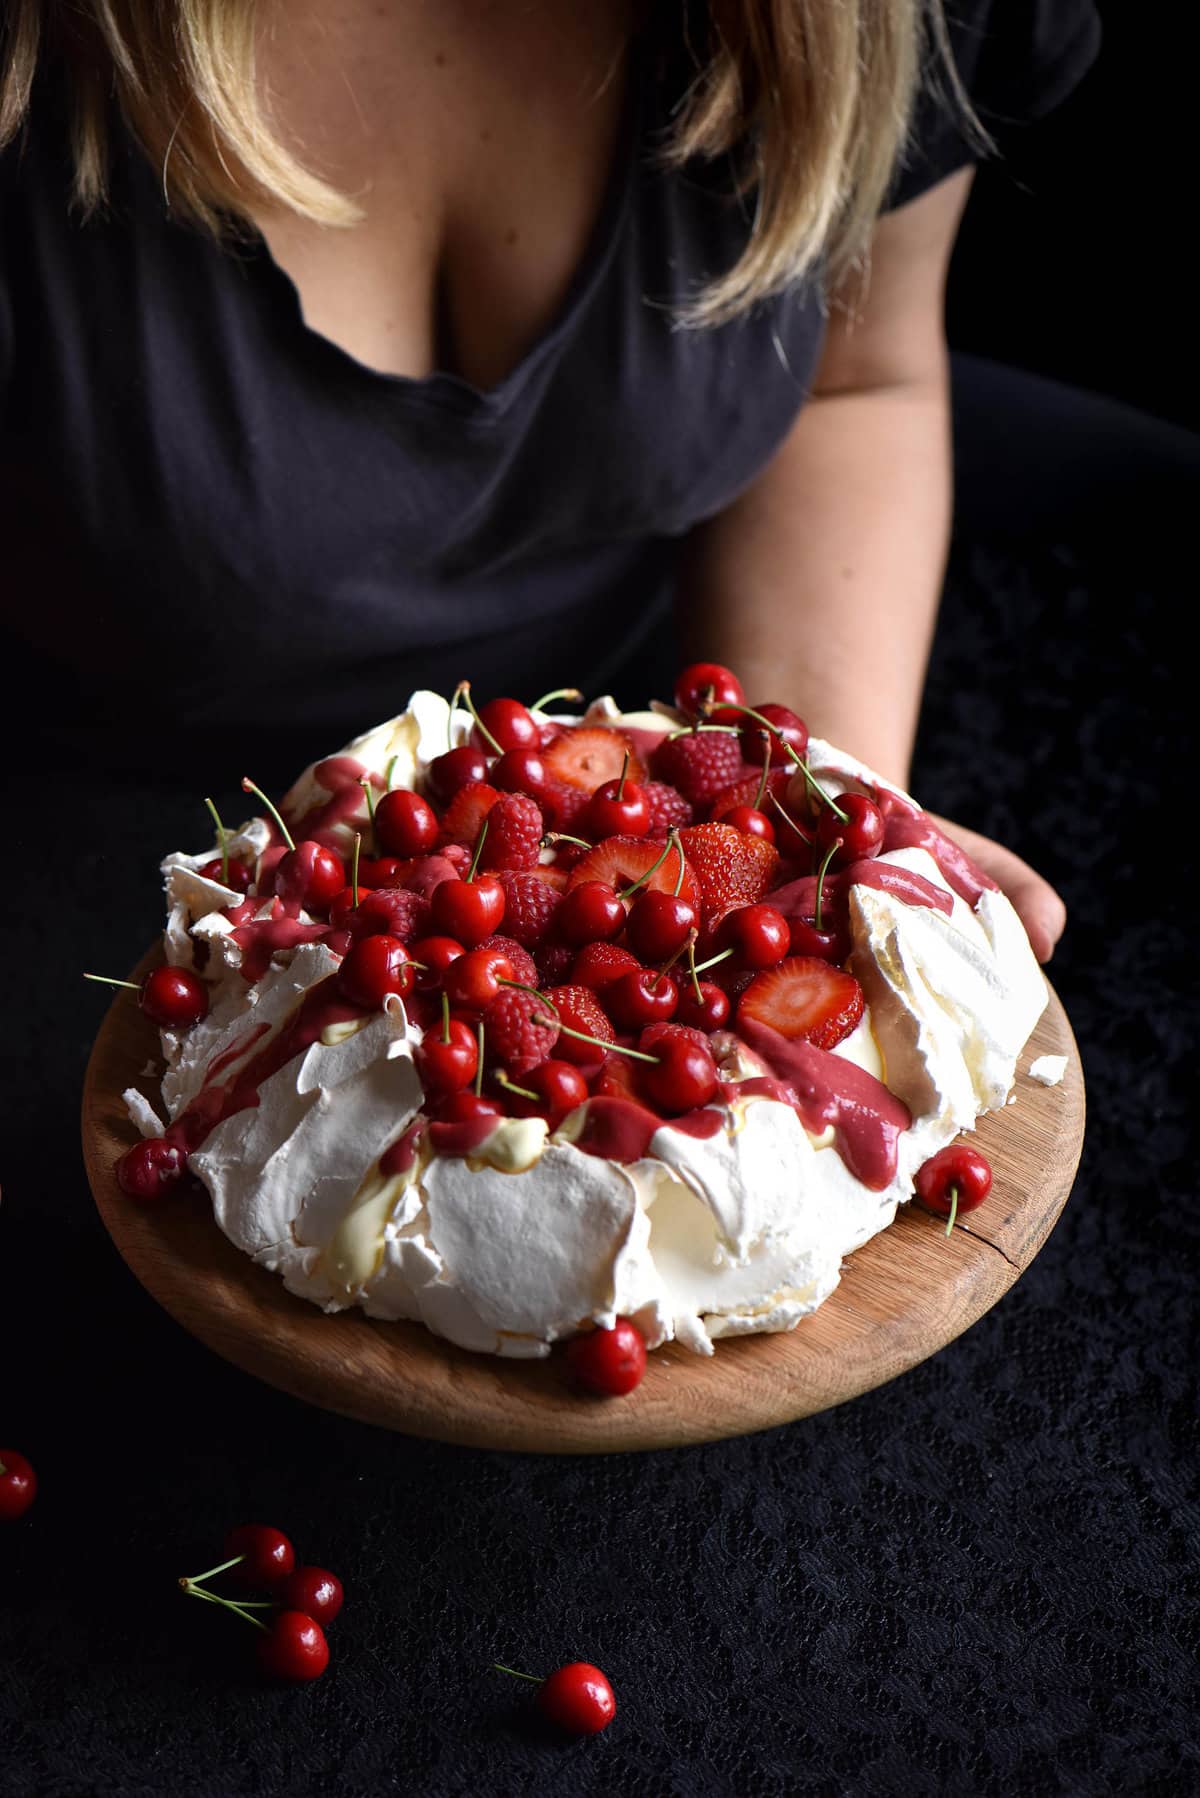 Pavlova with raspberry curd and lots of red berries against a dark backdrop